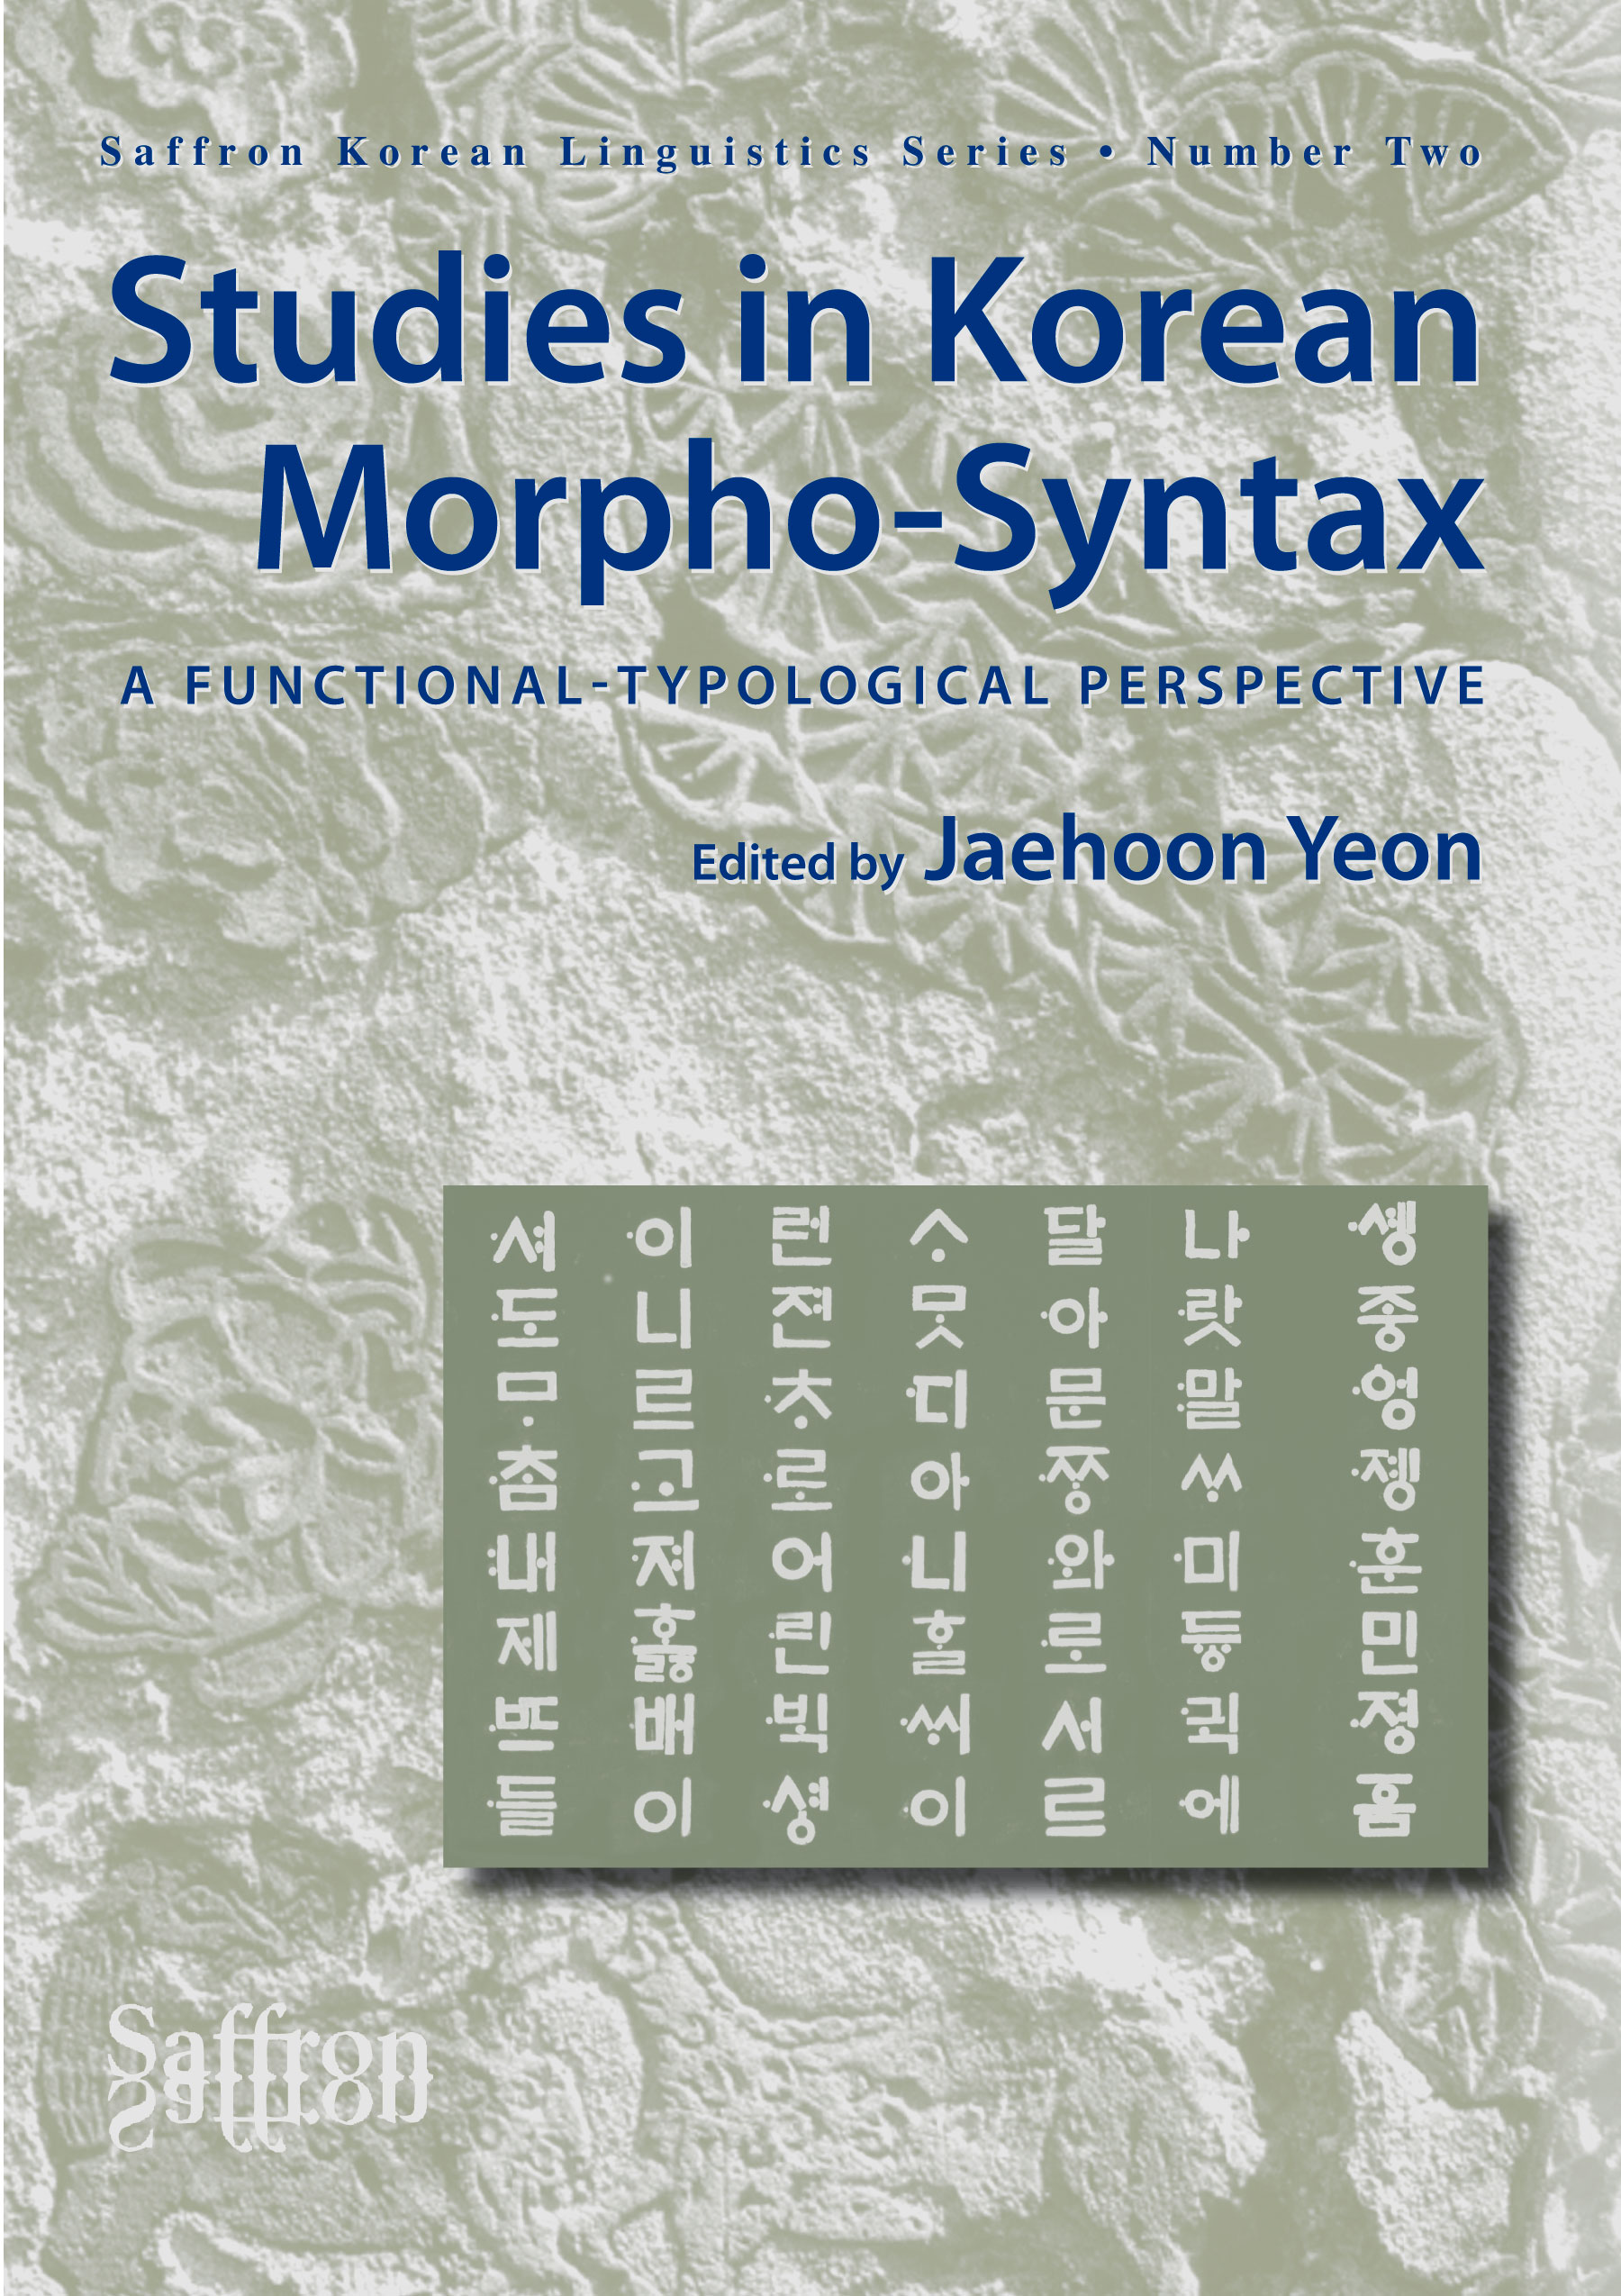 Discusses issues in Korean morpho-syntax from a functional-typological perspective. This book analyses Korean data from a cross-linguistic perspective, showing how cross-linguistic generalisations can contribute to an understanding of the structures in individual languages.